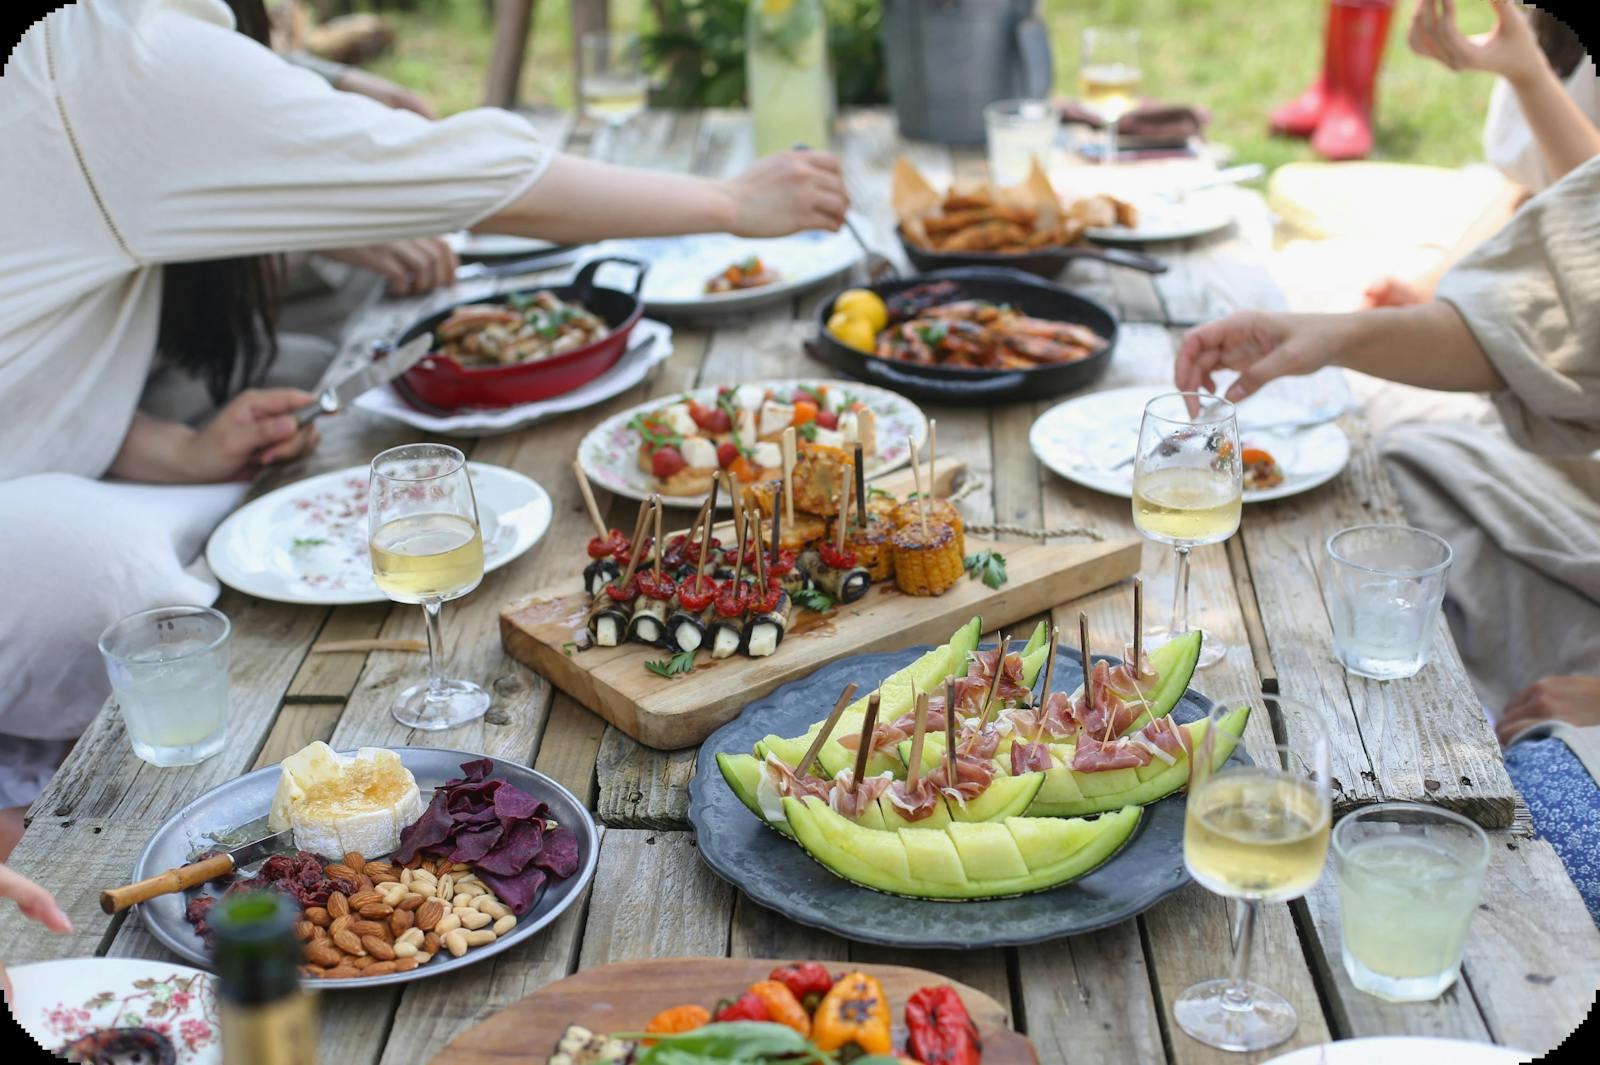 Image of a group dining at an outdoor table with summery food and wine